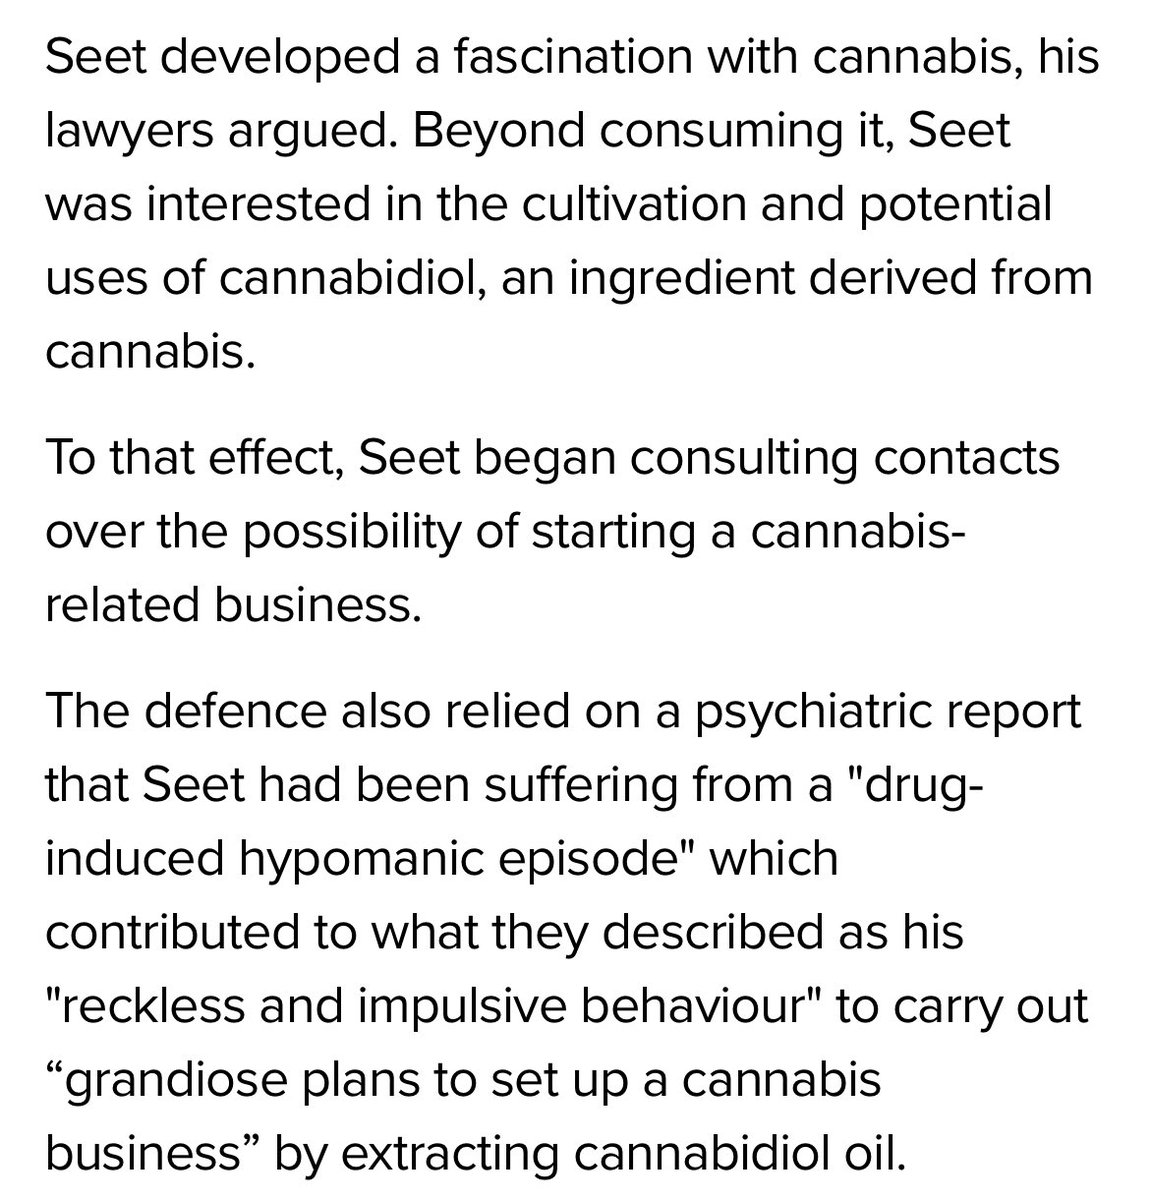 Sounds like this dude has a passion for cannabis and big dreams to build a company around it. Could’ve been a millionaire in the States. Instead, he’s facing the death penalty in Singapore. todayonline.com/singapore/ex-p…